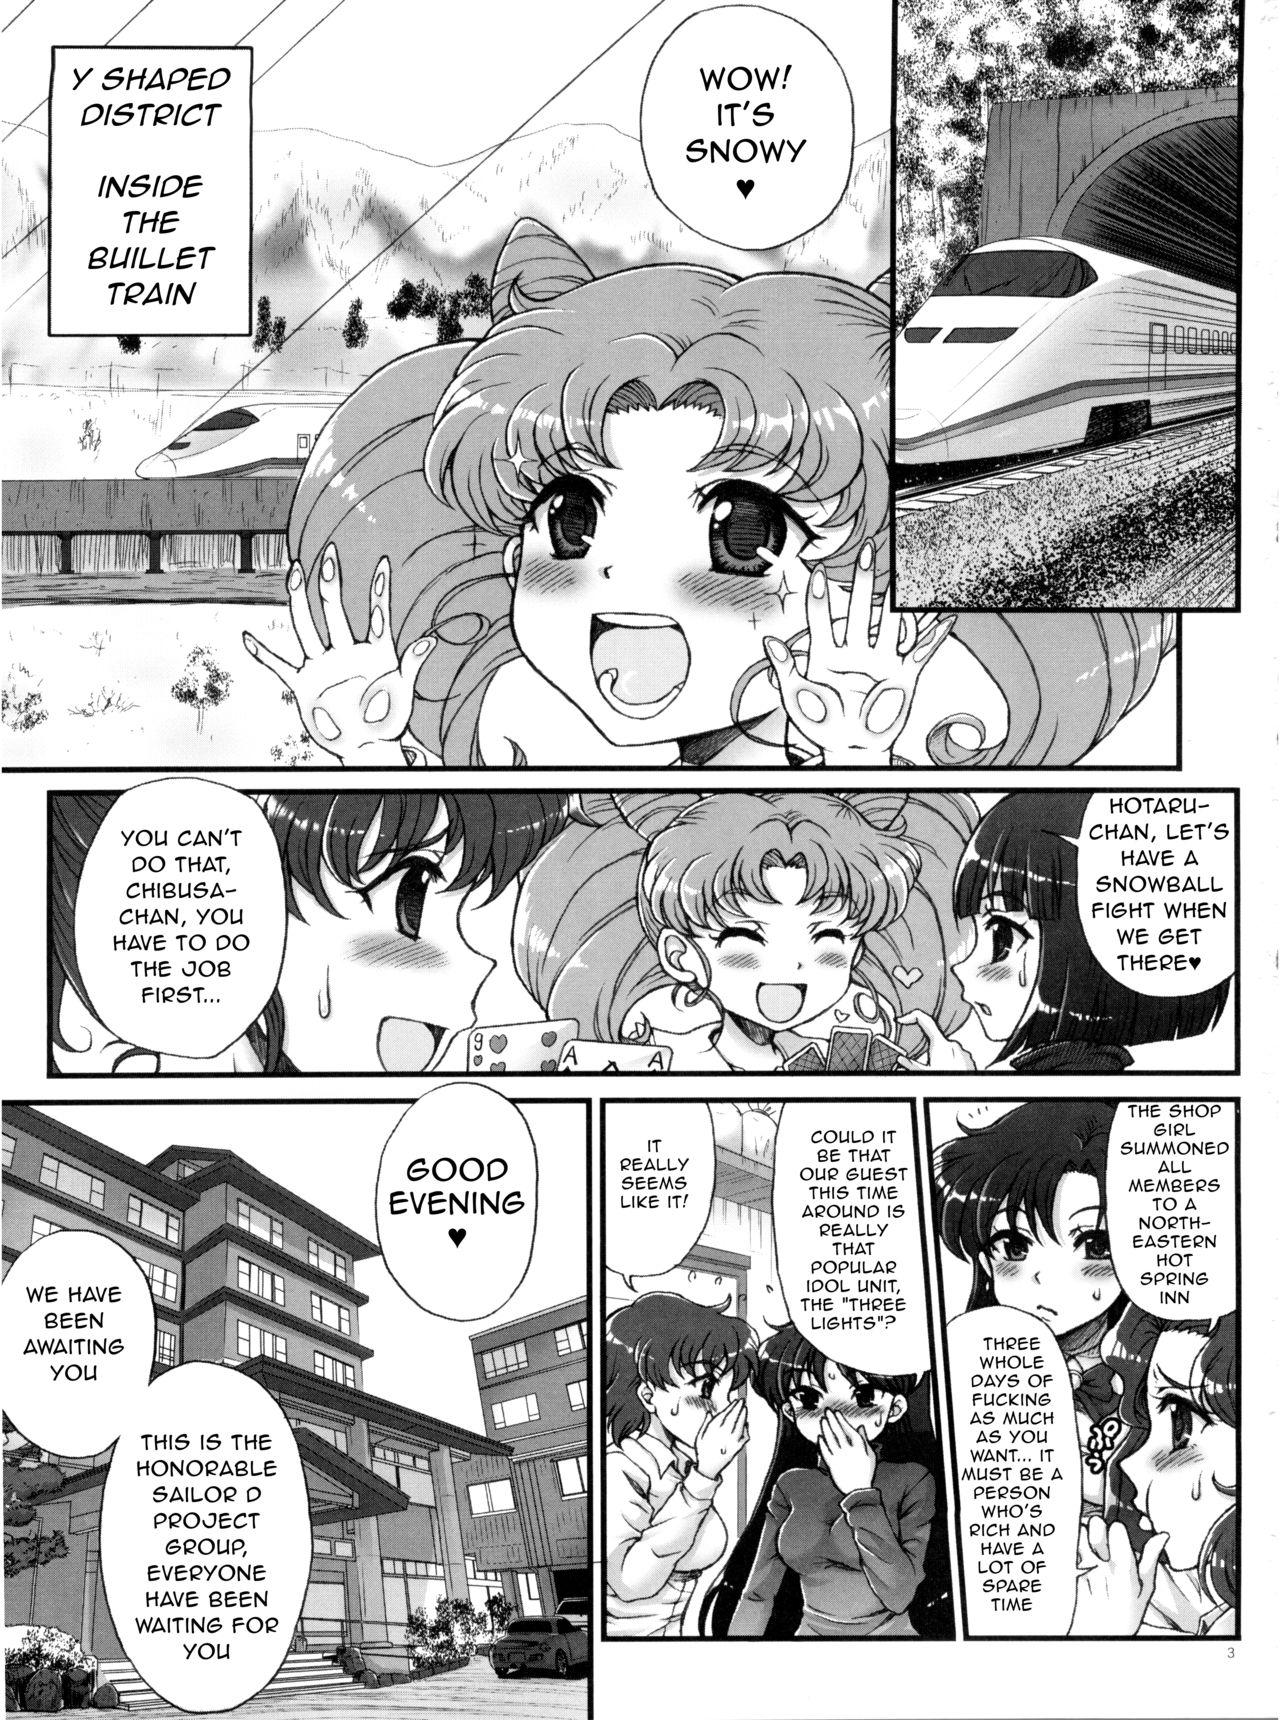 Little Sailor Delivery Health All Stars - Sailor moon Thylinh - Page 2